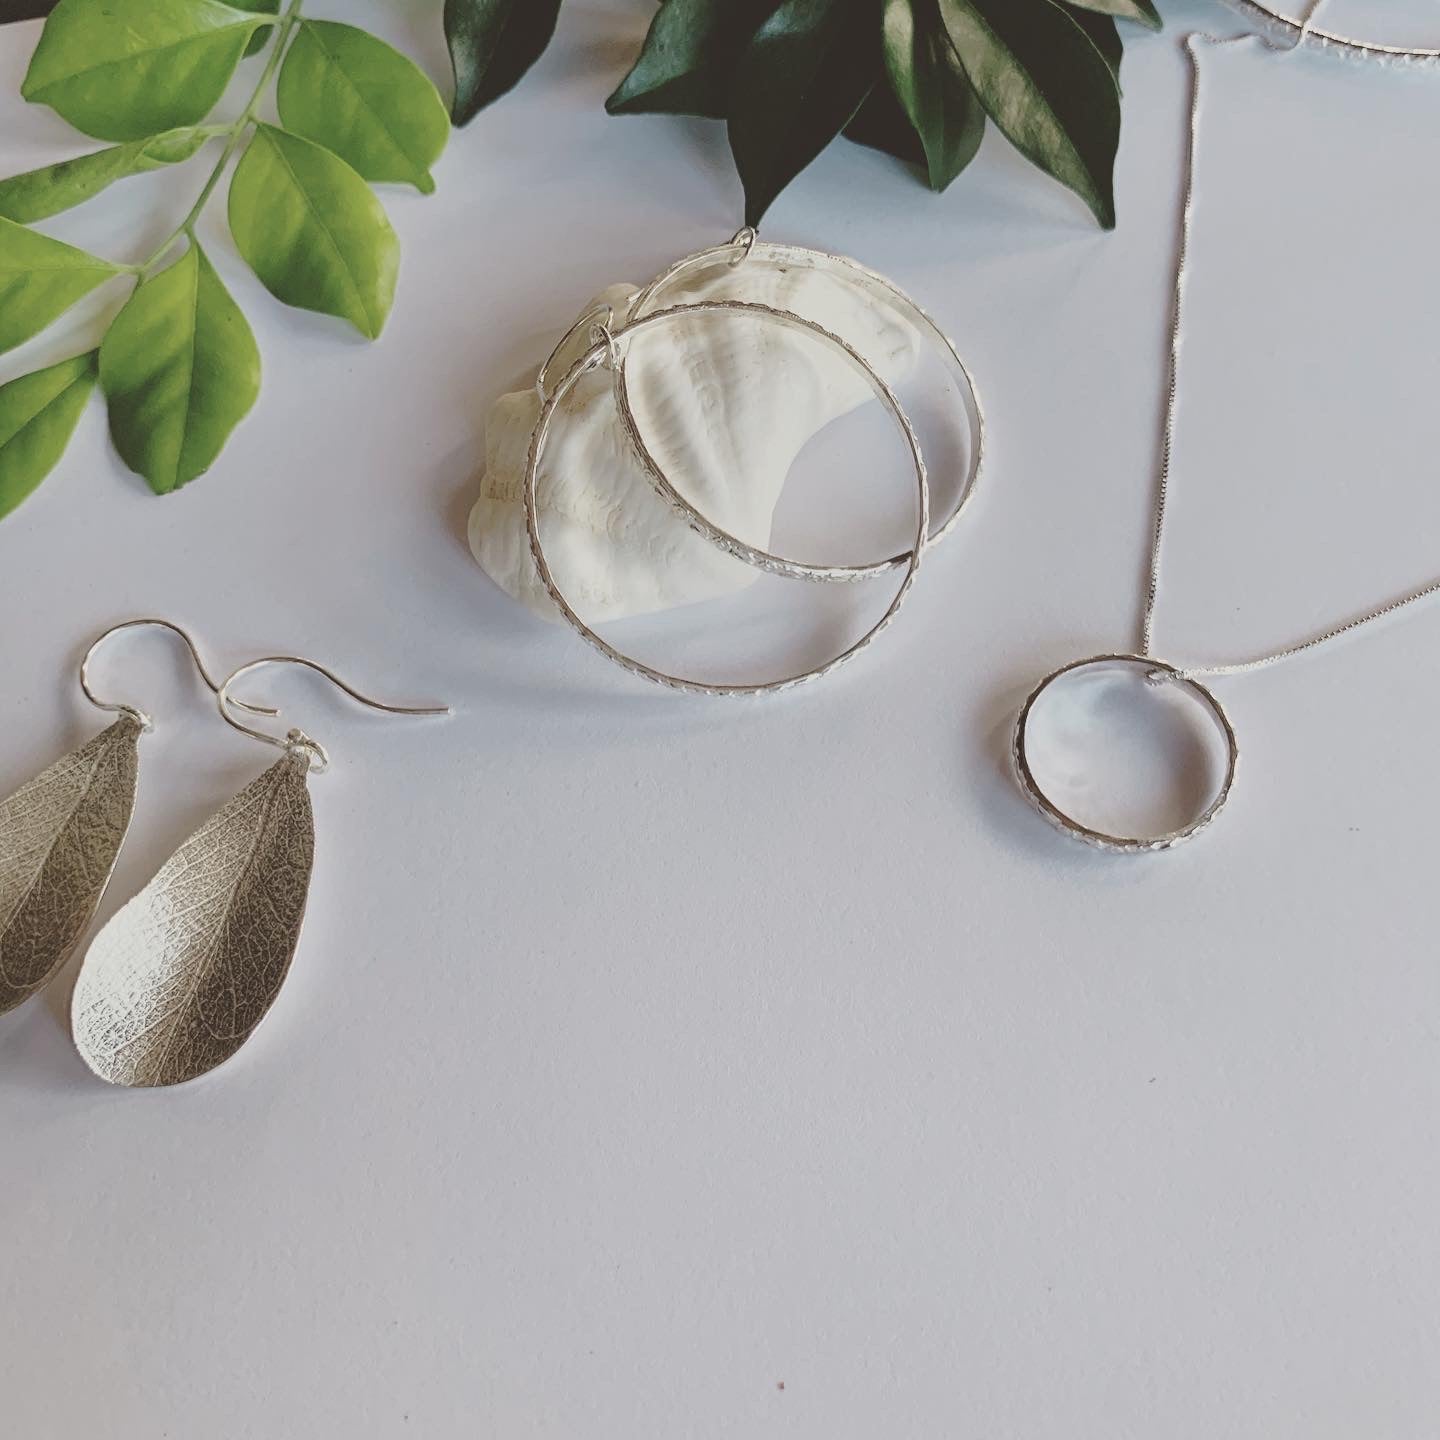 Leaf earrings on sterling silver ear hooks. Beauty and light🍃 Exquisite fine leaf detail in silver. A bit of earth inspiration, breath and connection with beauty